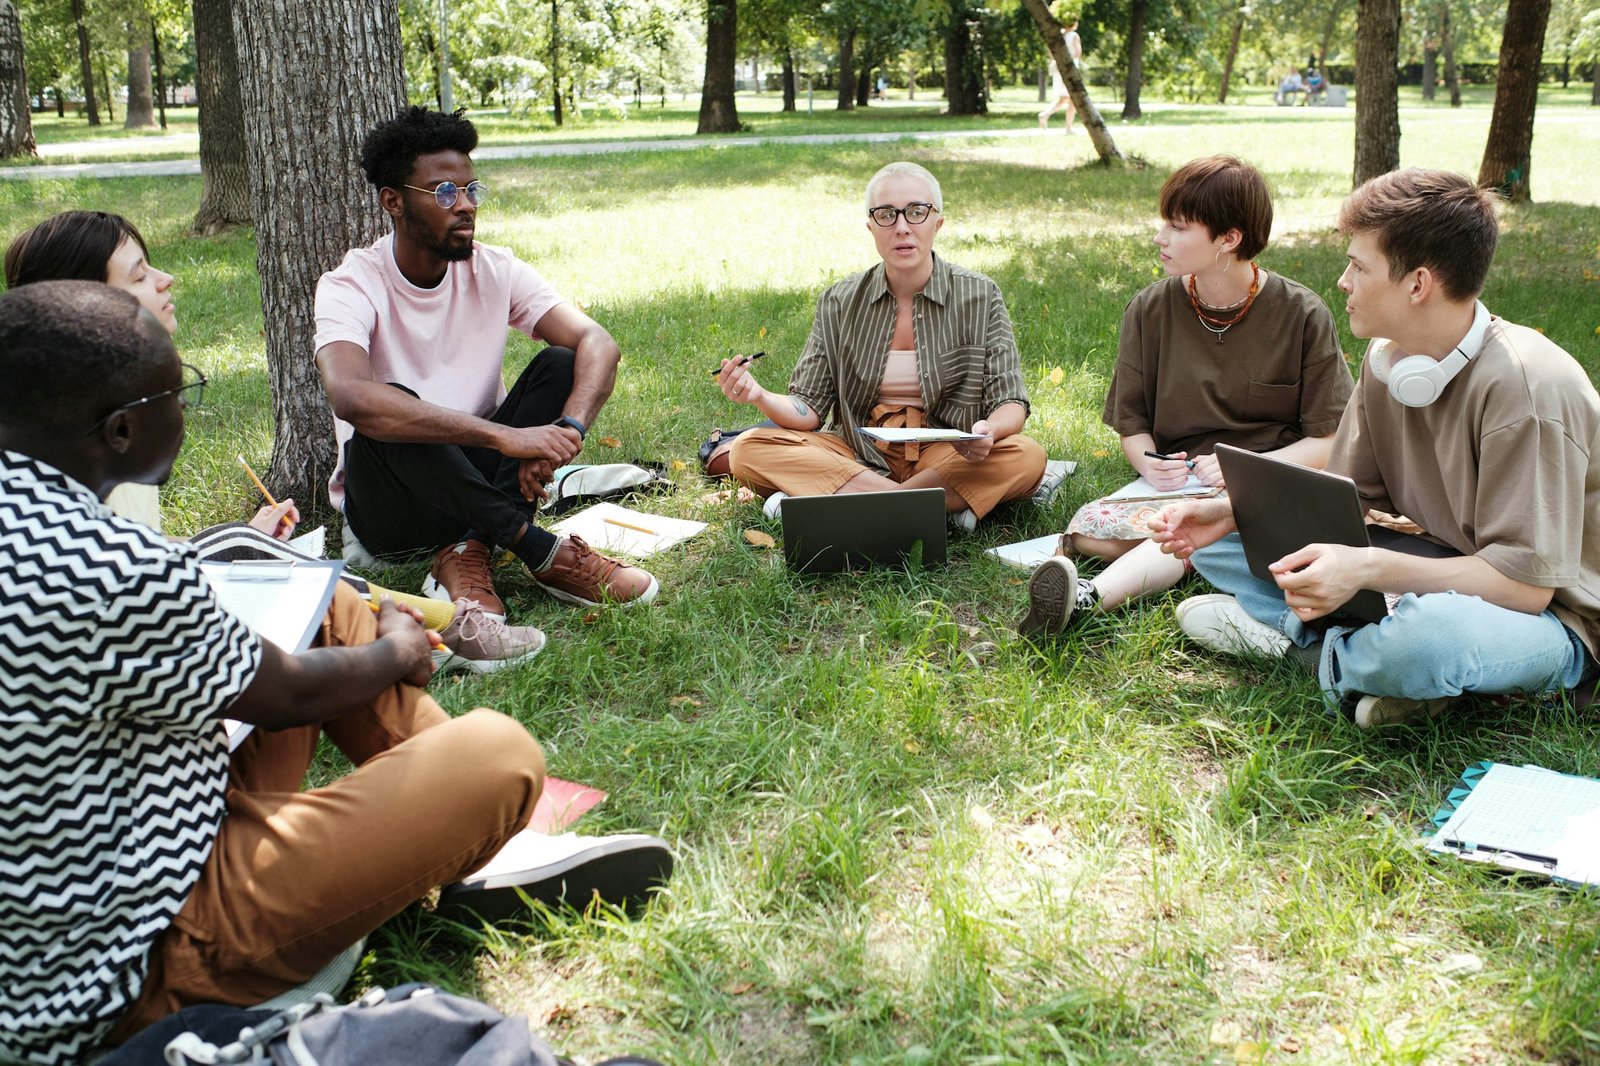 Teacher with students studying outdoors